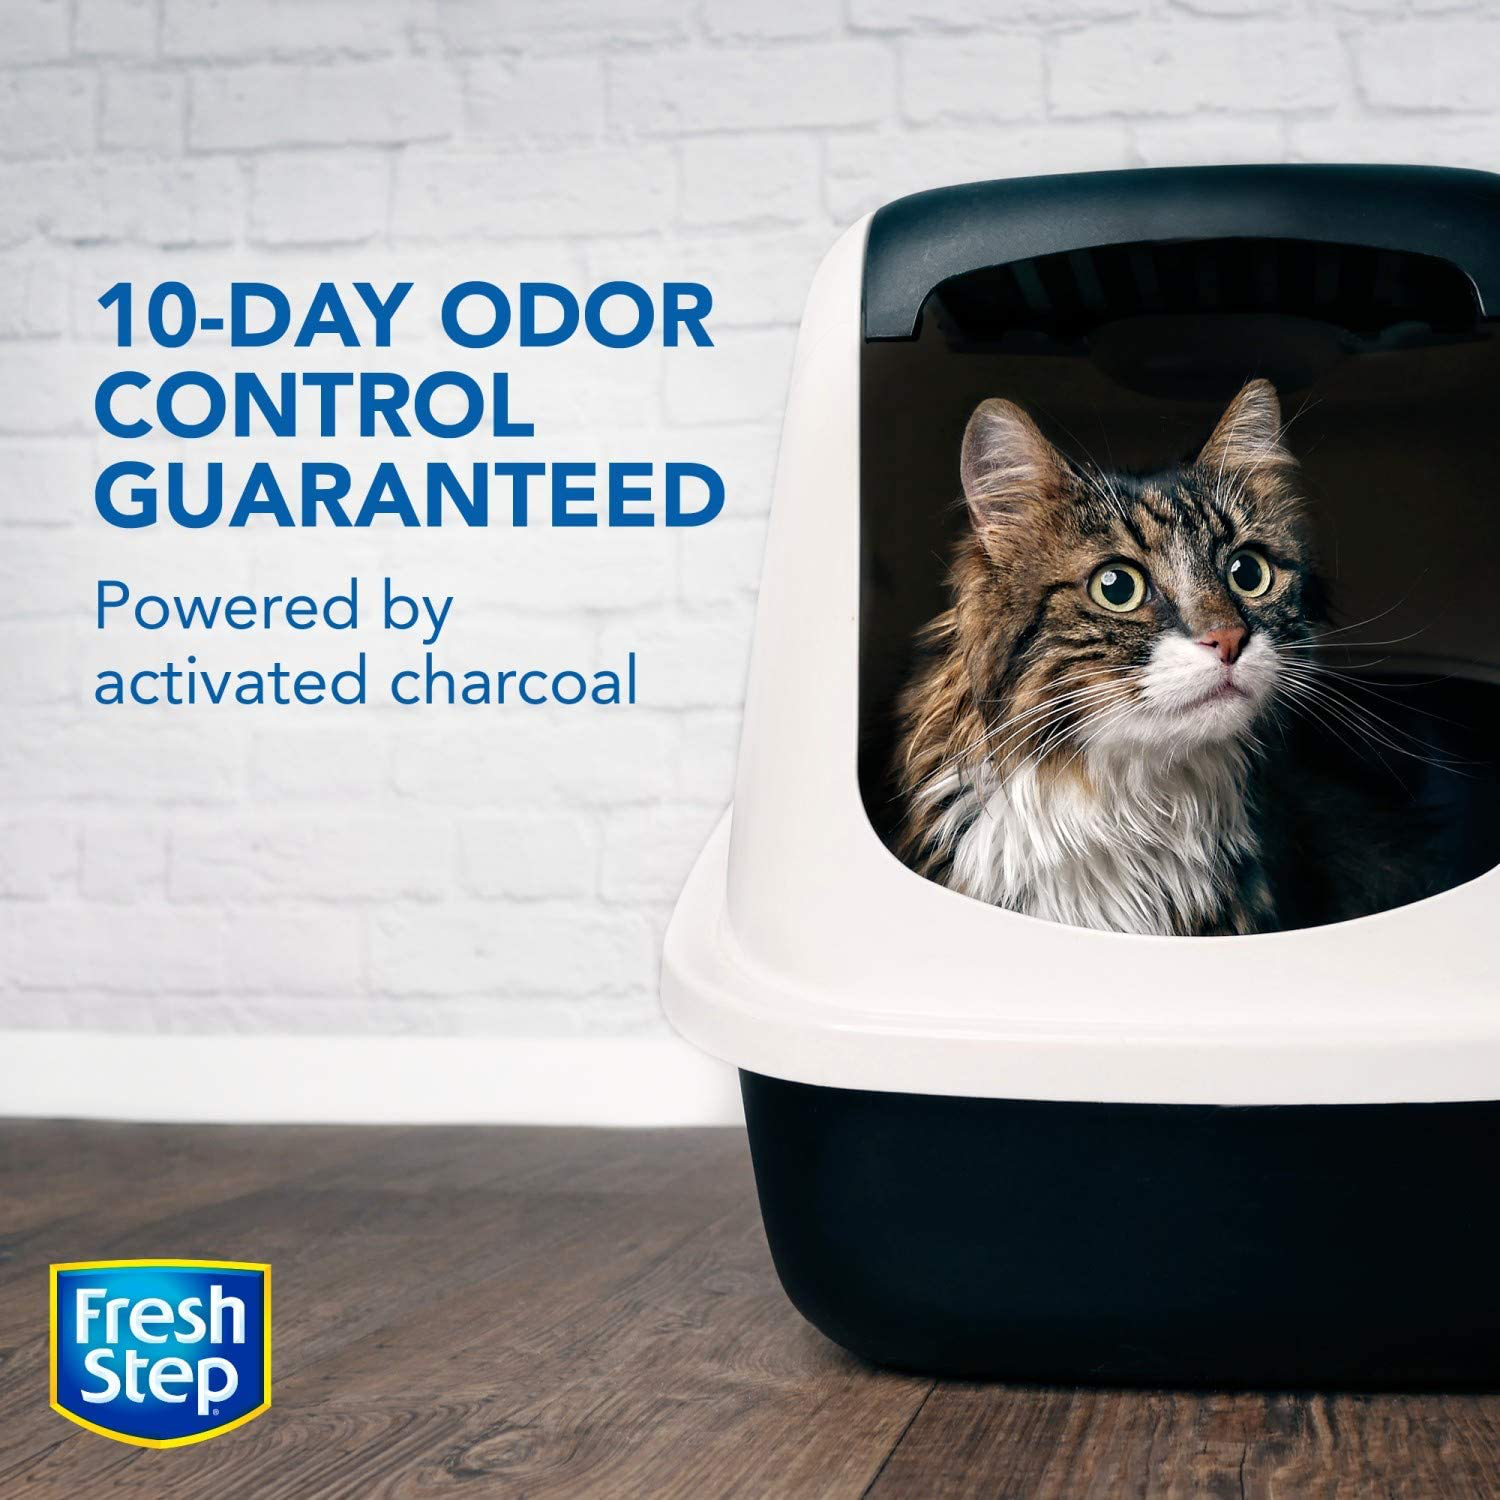 Fresh Step Advanced Simply Unscented Clumping Cat Litter, Recommended by Vets